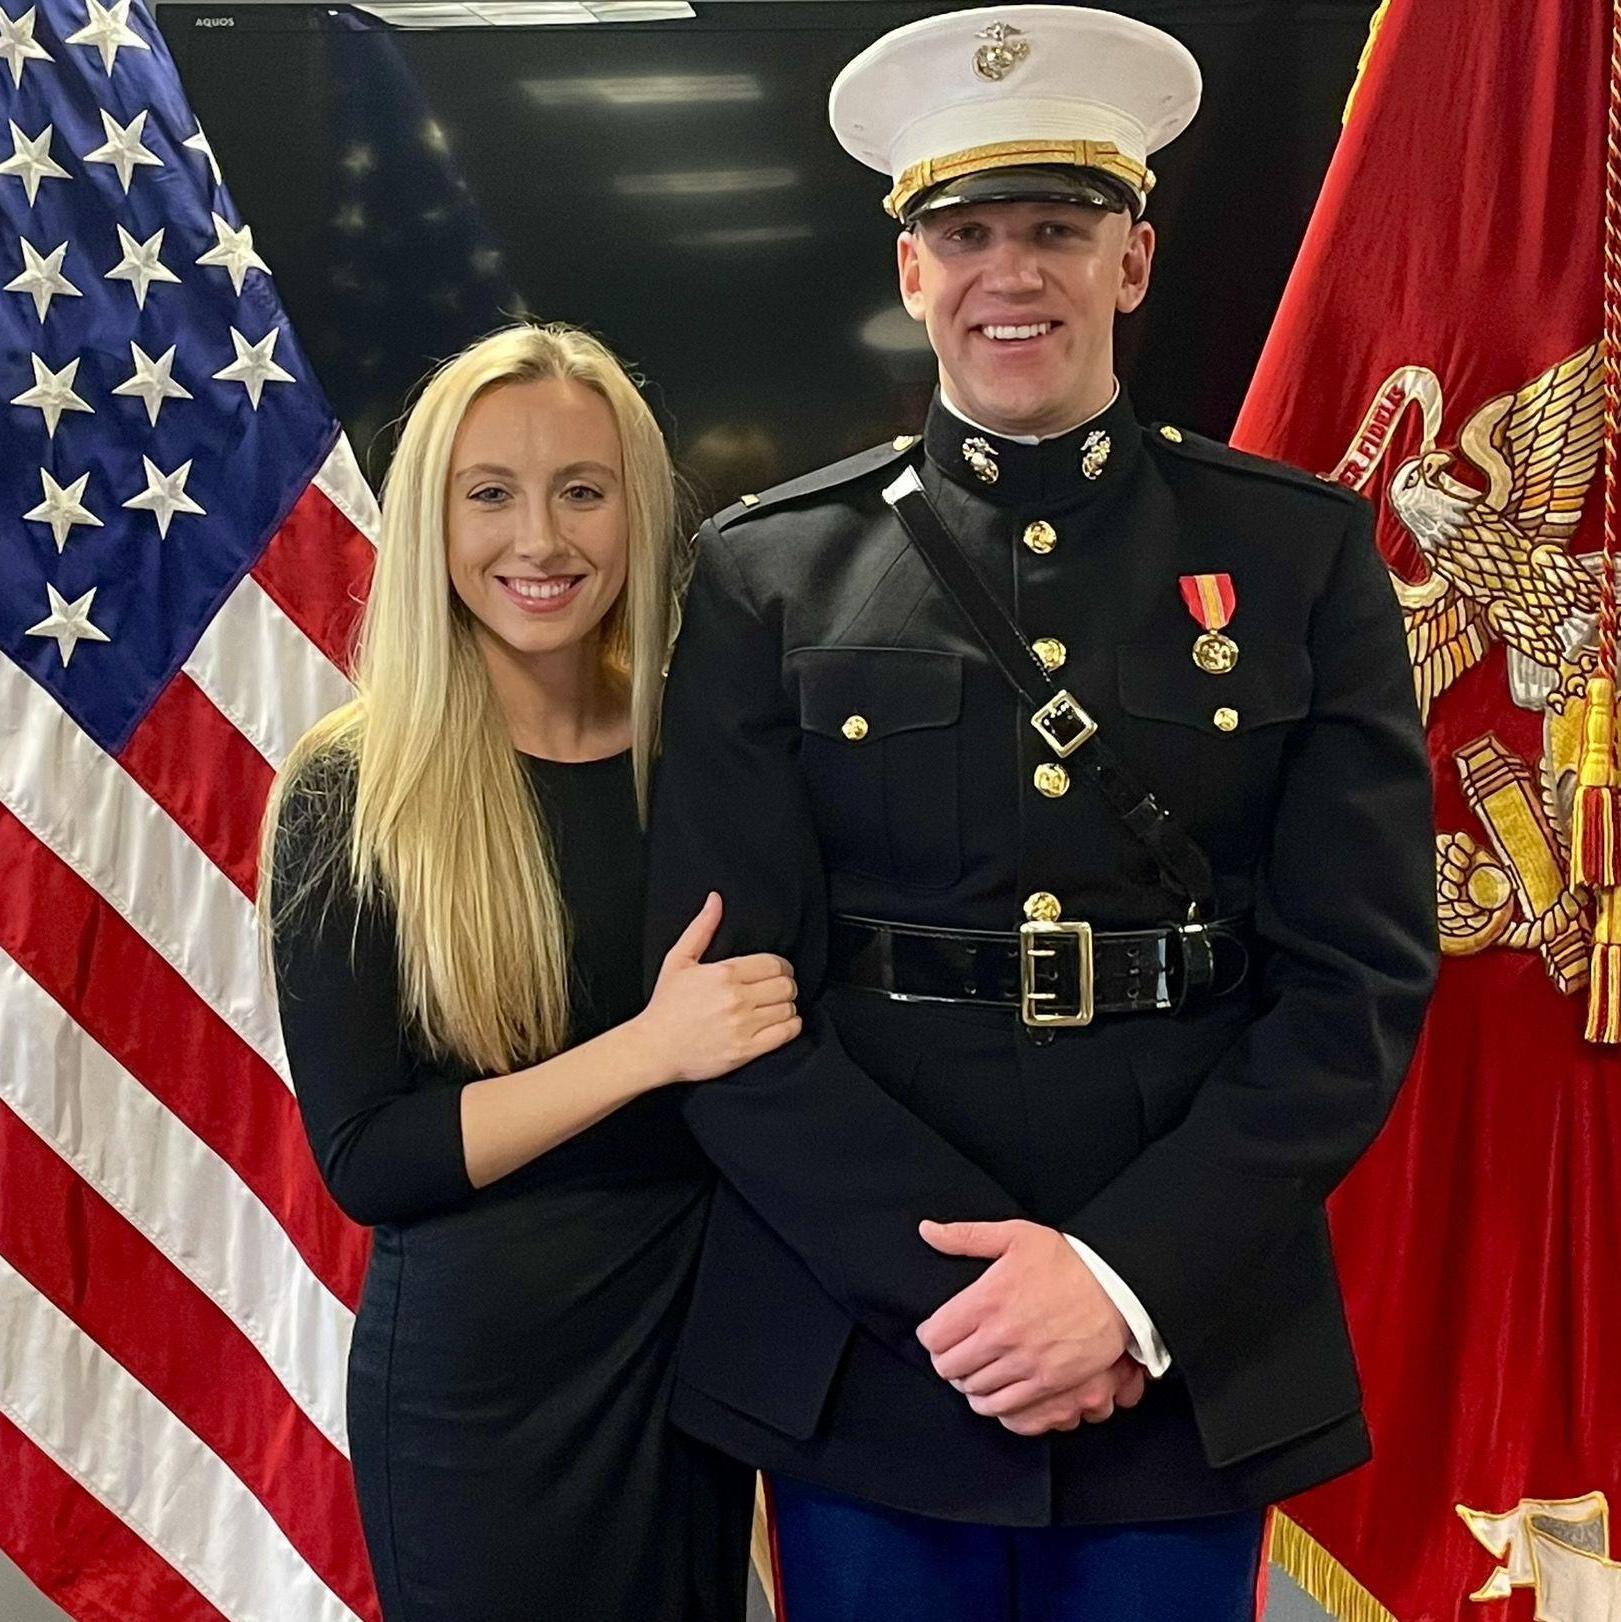 This photo was taken at Daniel's Commissioning ceremony into the Marine Corps.